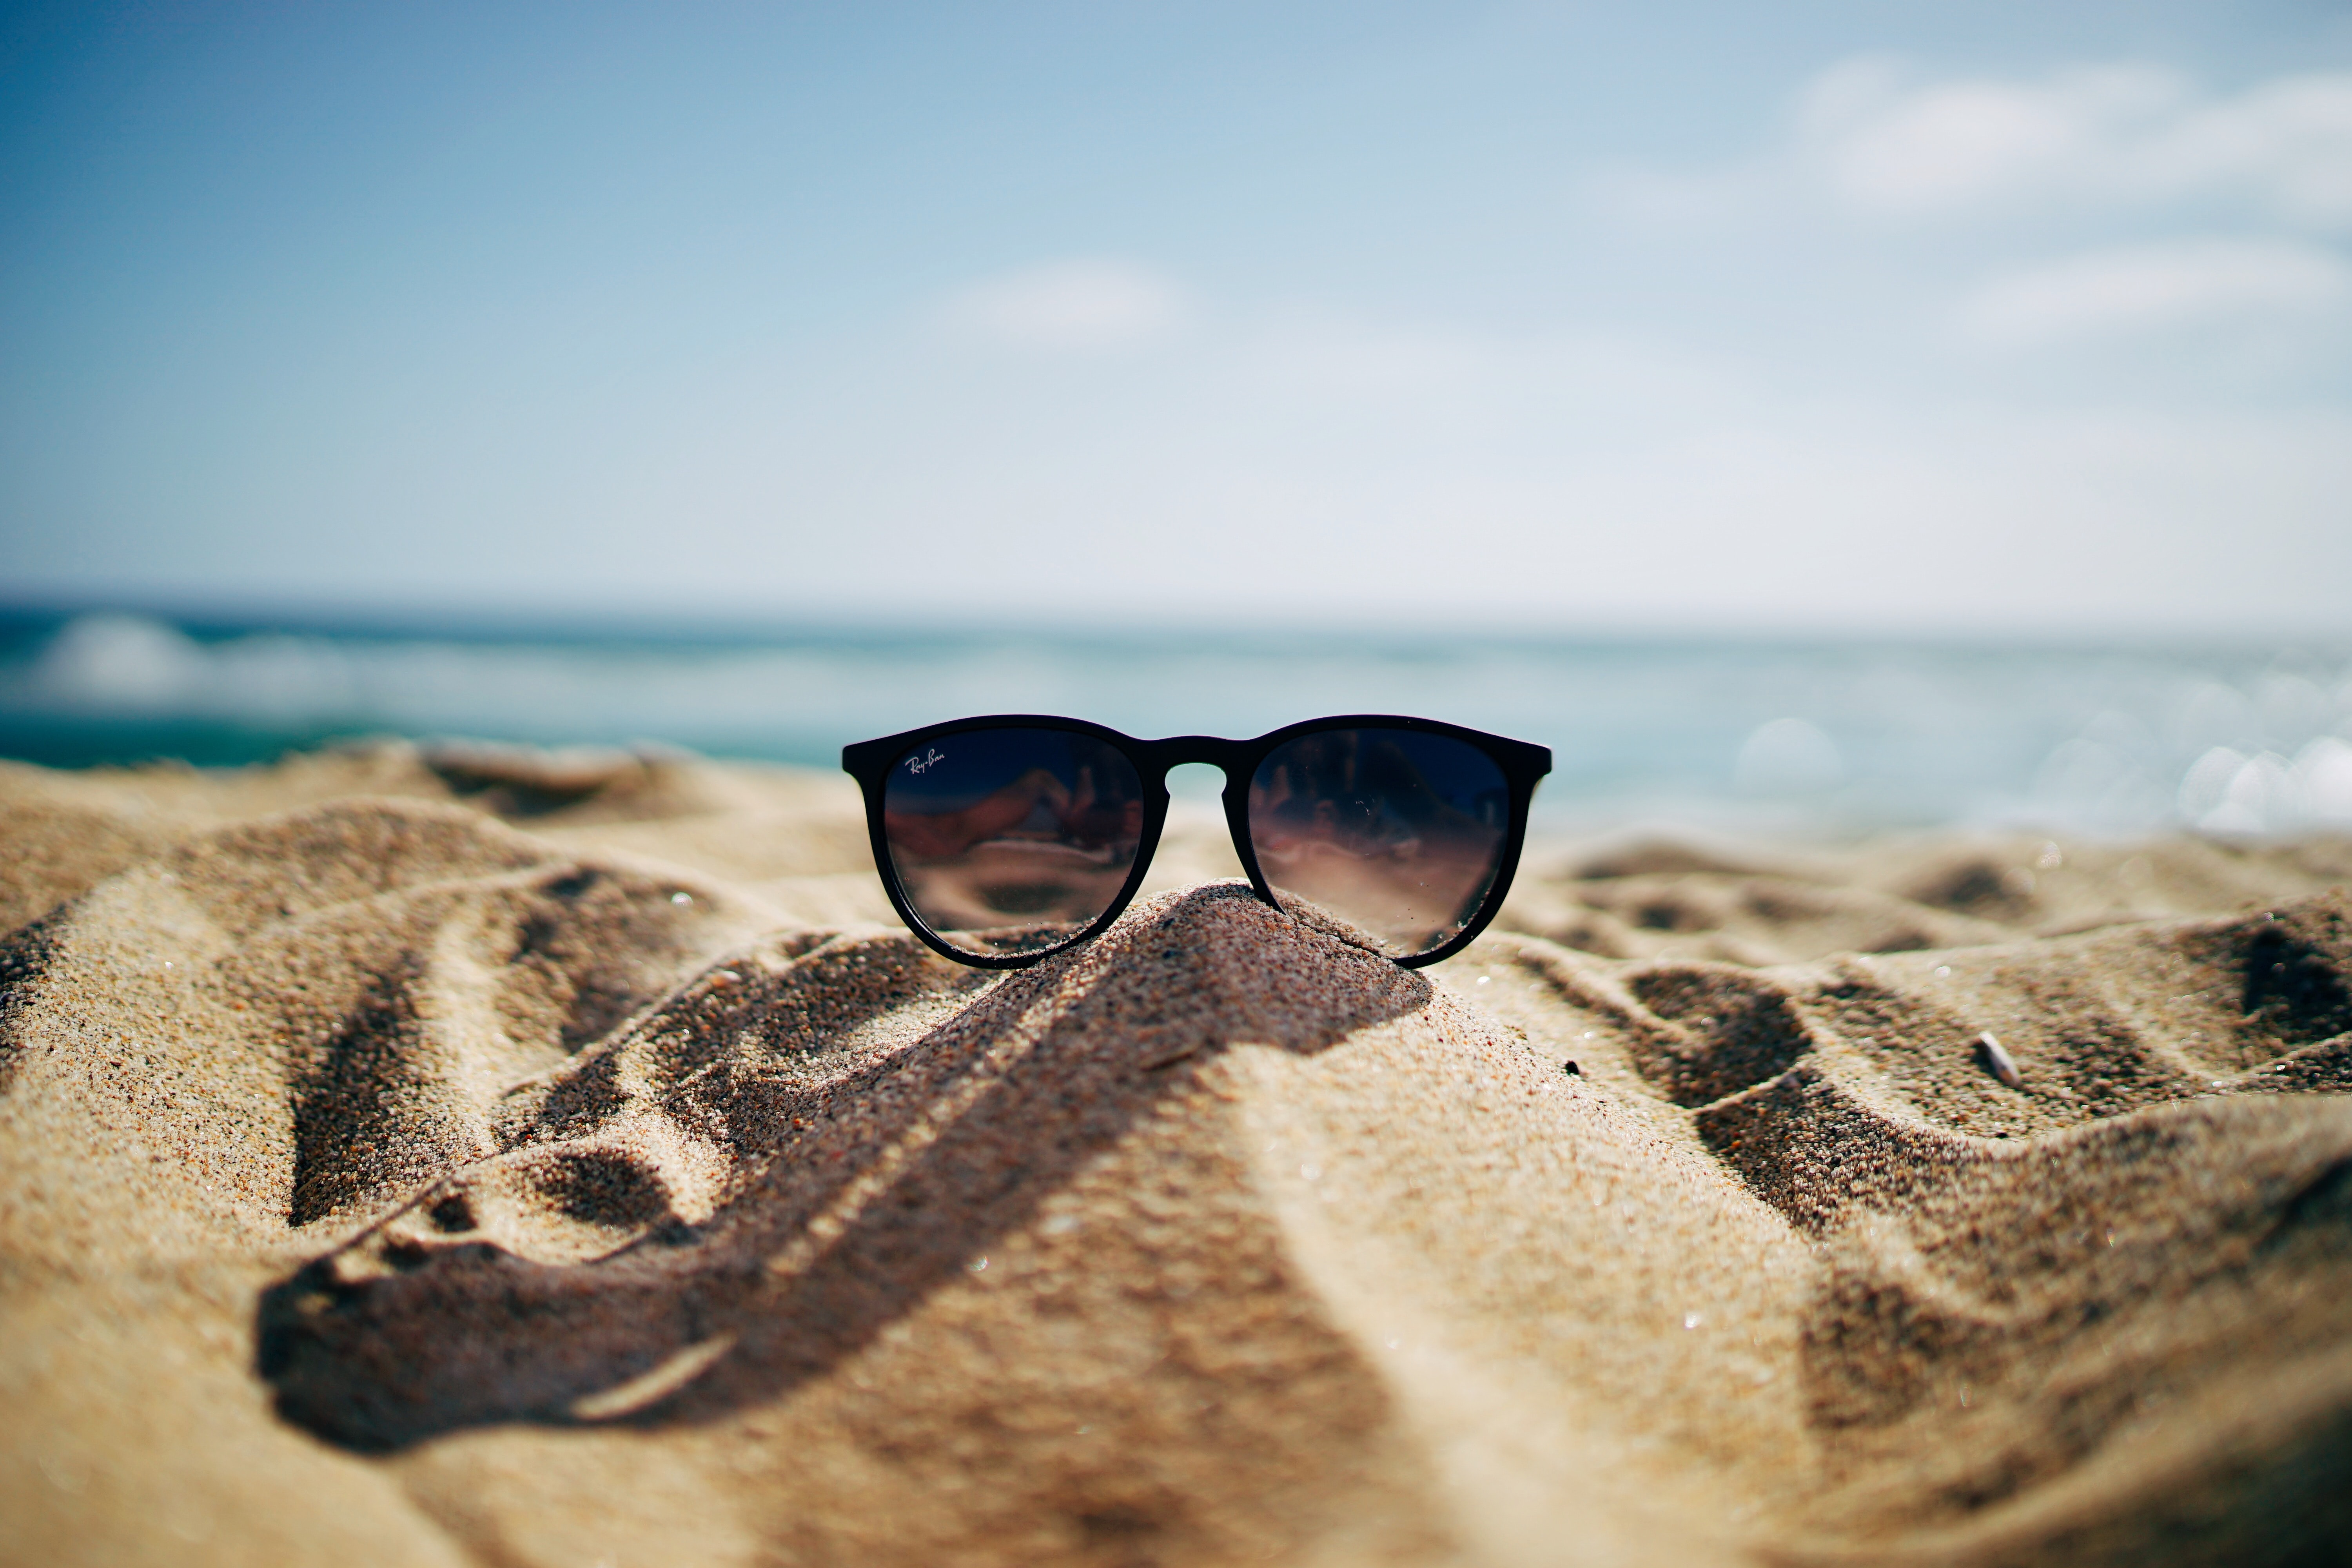 Sunglasses on the sand at the beach in front of the ocean